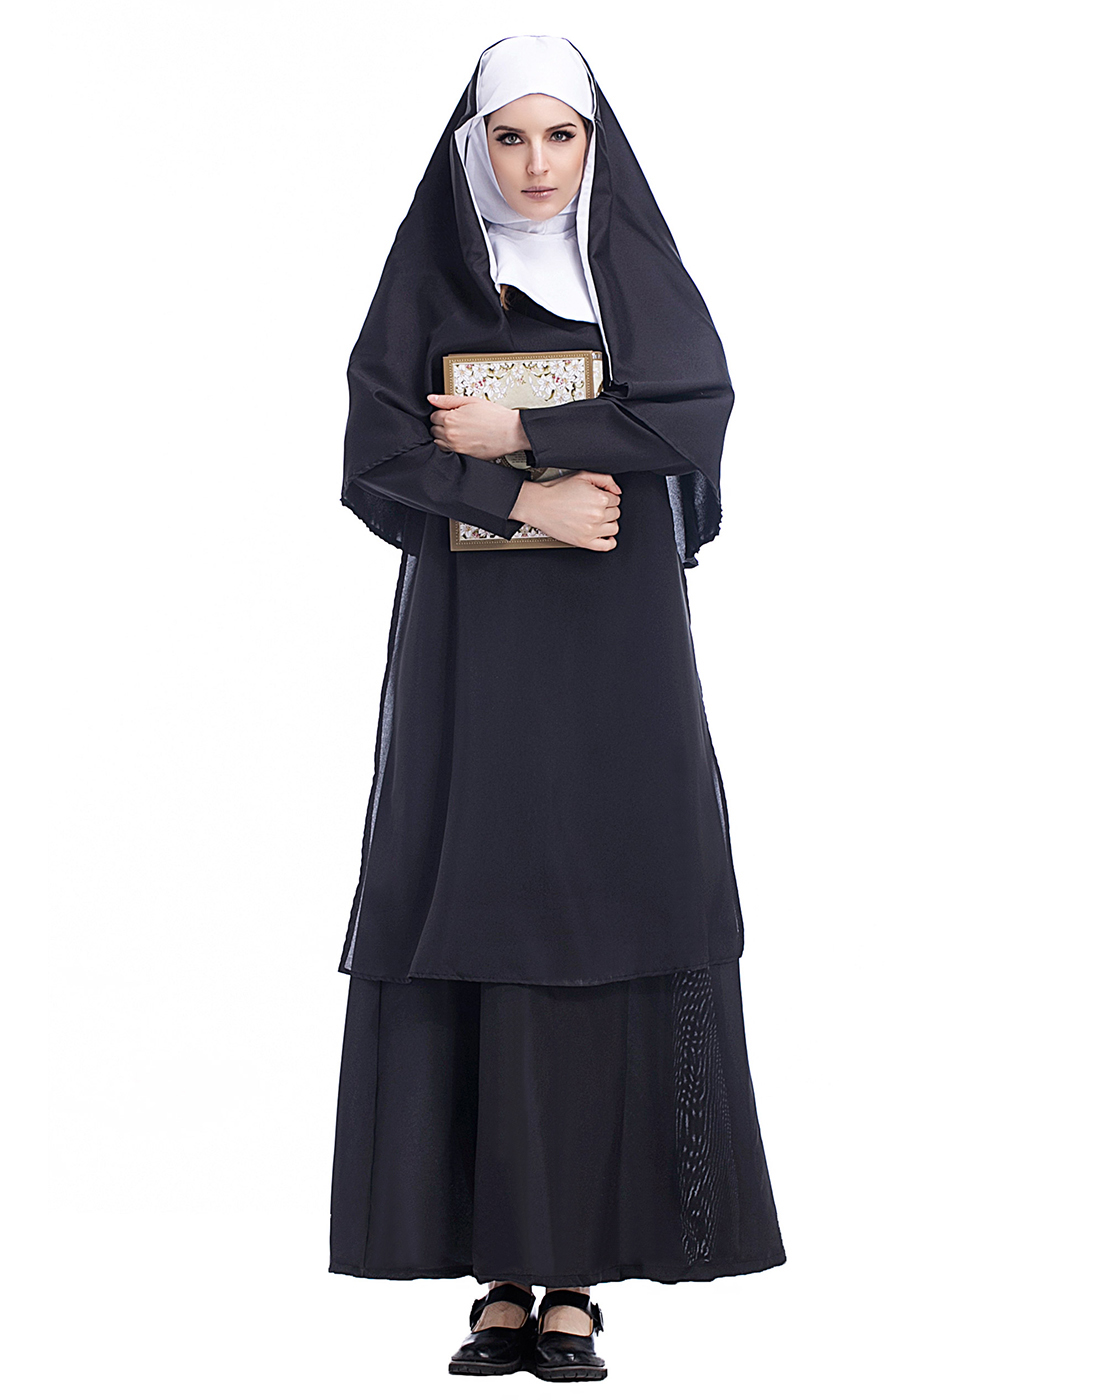 HDE Nun Costume for Women Traditional Adult Sister Black Robe and Habit Religious Halloween Costumes - image 1 of 4